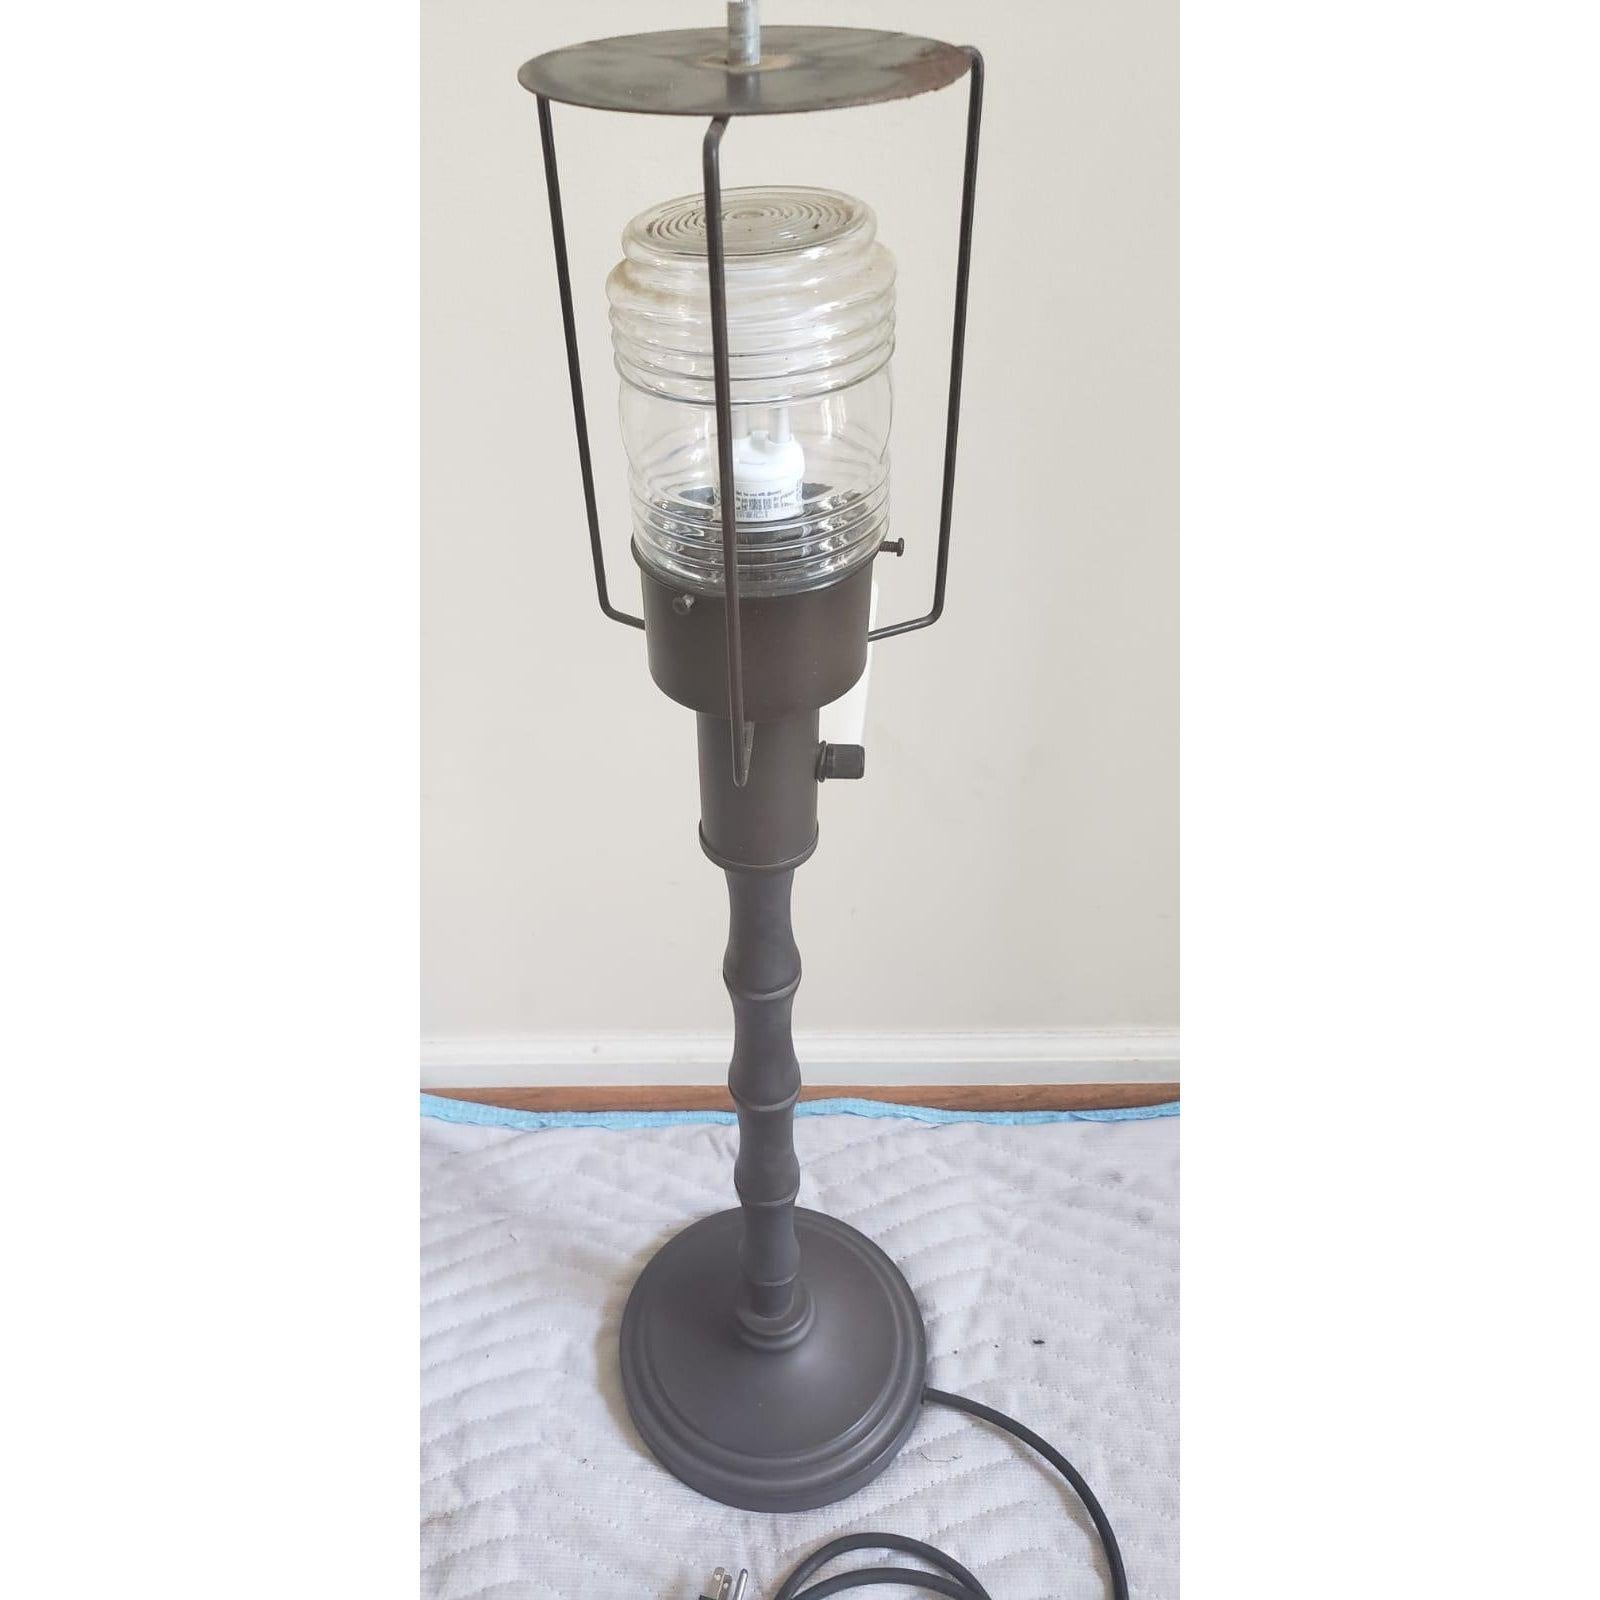 1970s outdoor faux bamboo metal lamp.
Faux Wicker shade in walnut color.
31